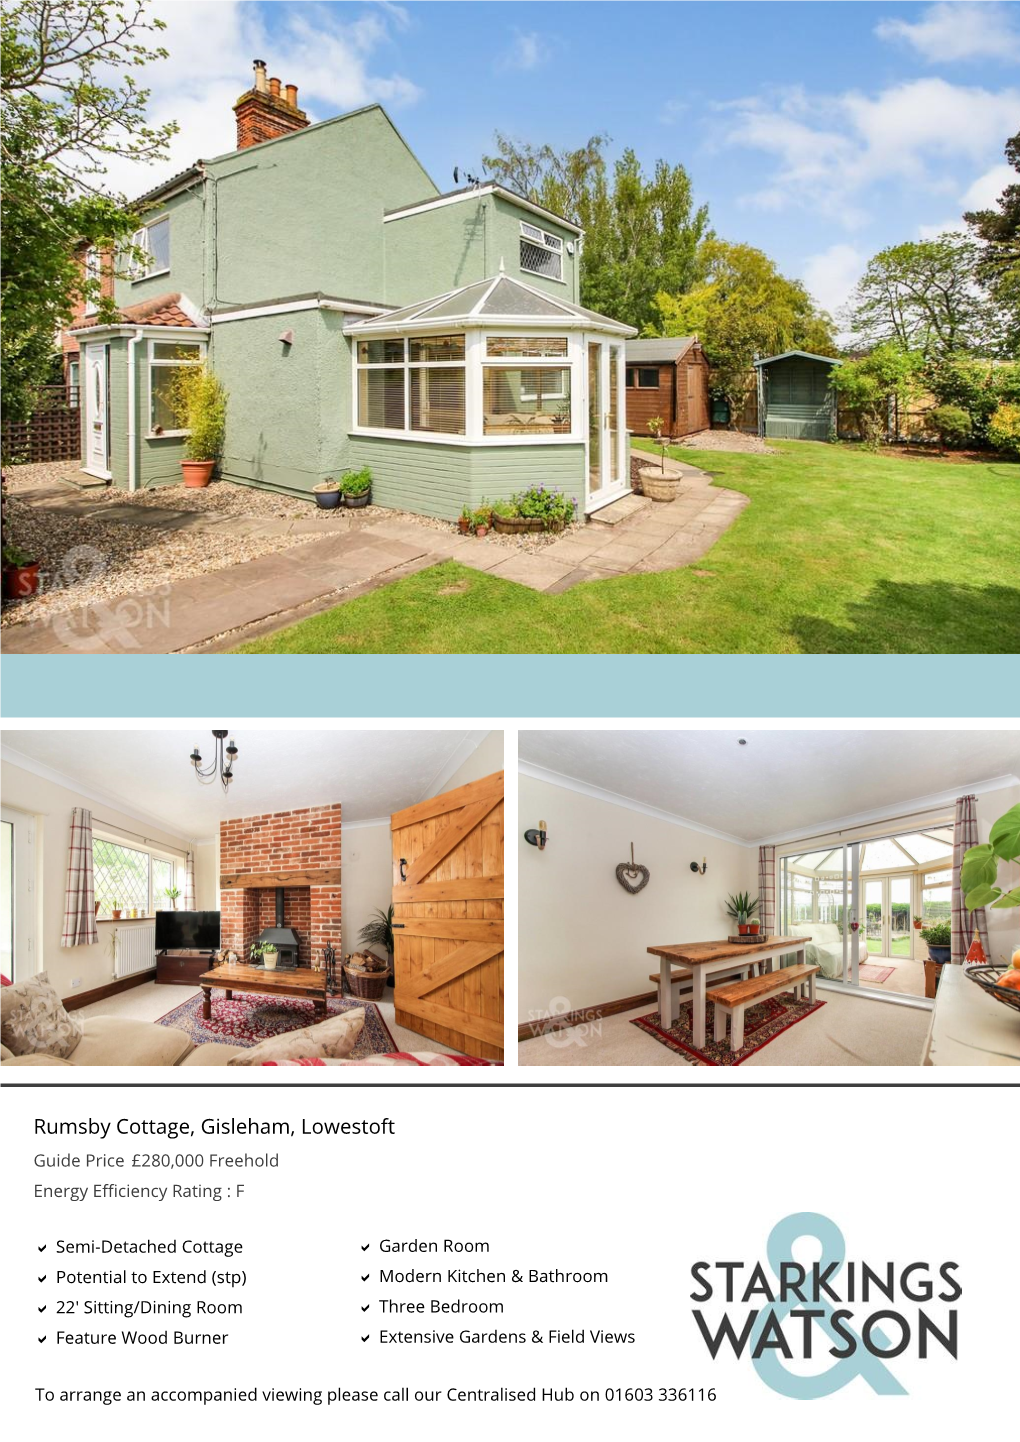 Rumsby Cottage, Gisleham, Lowestoft Guide Price £280,000 Freehold Energy Efficiency Rating : F